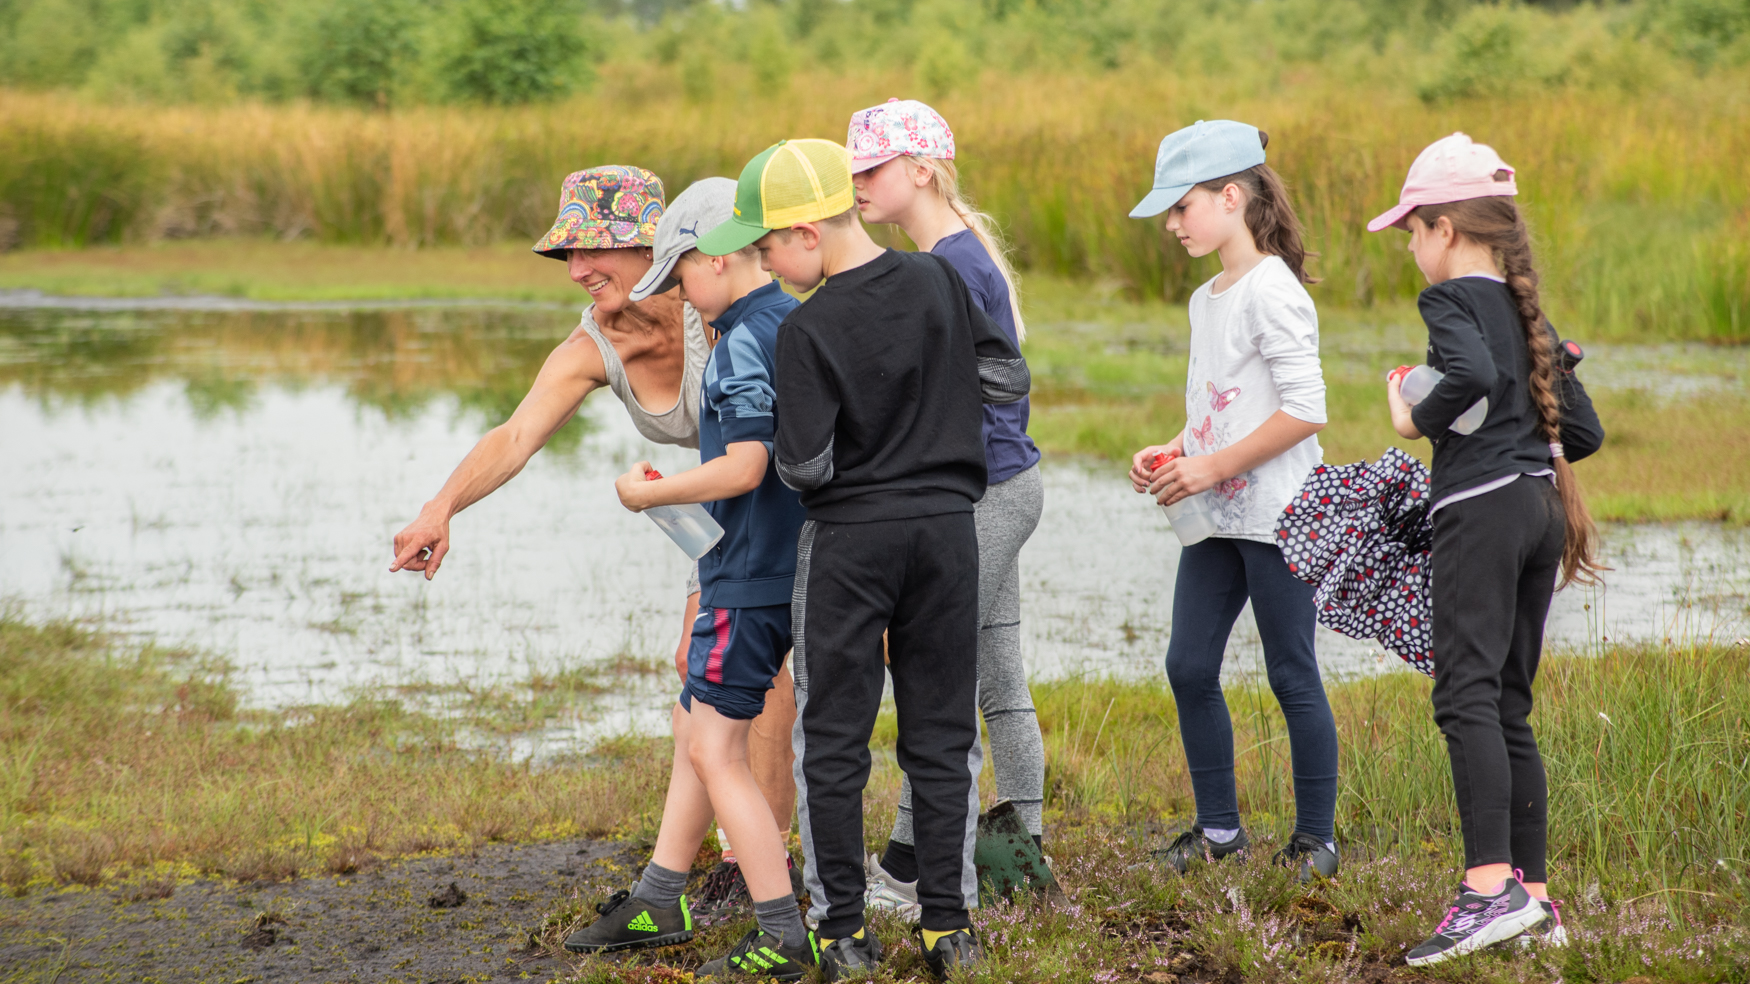 A woman in a colourful hat points at something on the ground. Five children, wearing caps, look where she is pointing. They are standing in a boggy area with a pond behind them, and long grasses.